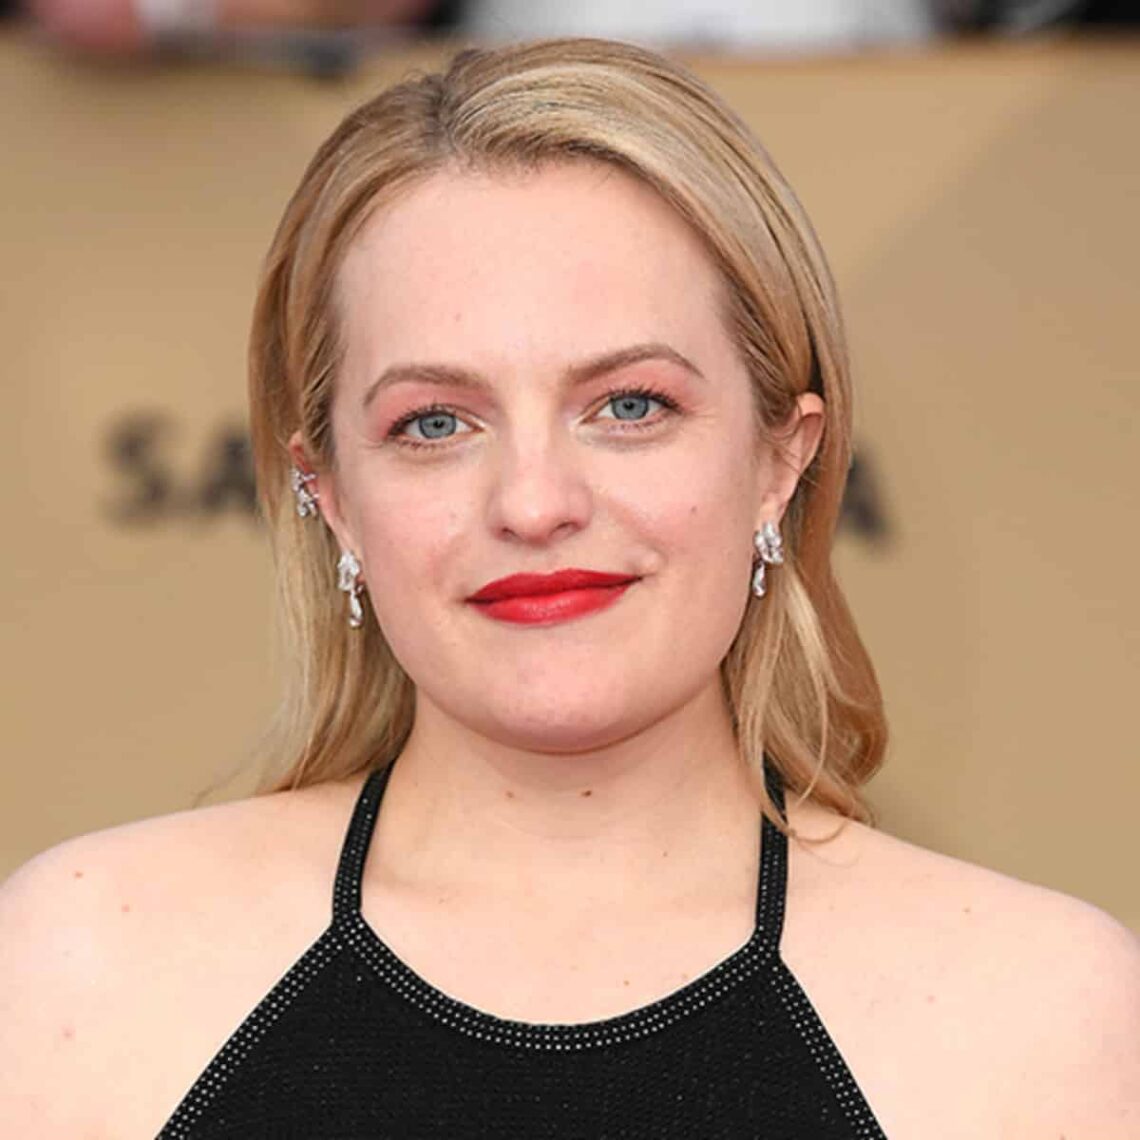 Elisabeth Moss Arrives At The 24th Annual Screen Actors Guild Awards At The Shrine Auditorium On January 21 2018 In Los Angeles California Photo By Steve Granitz Wireimage Square 6917035 1140x1140